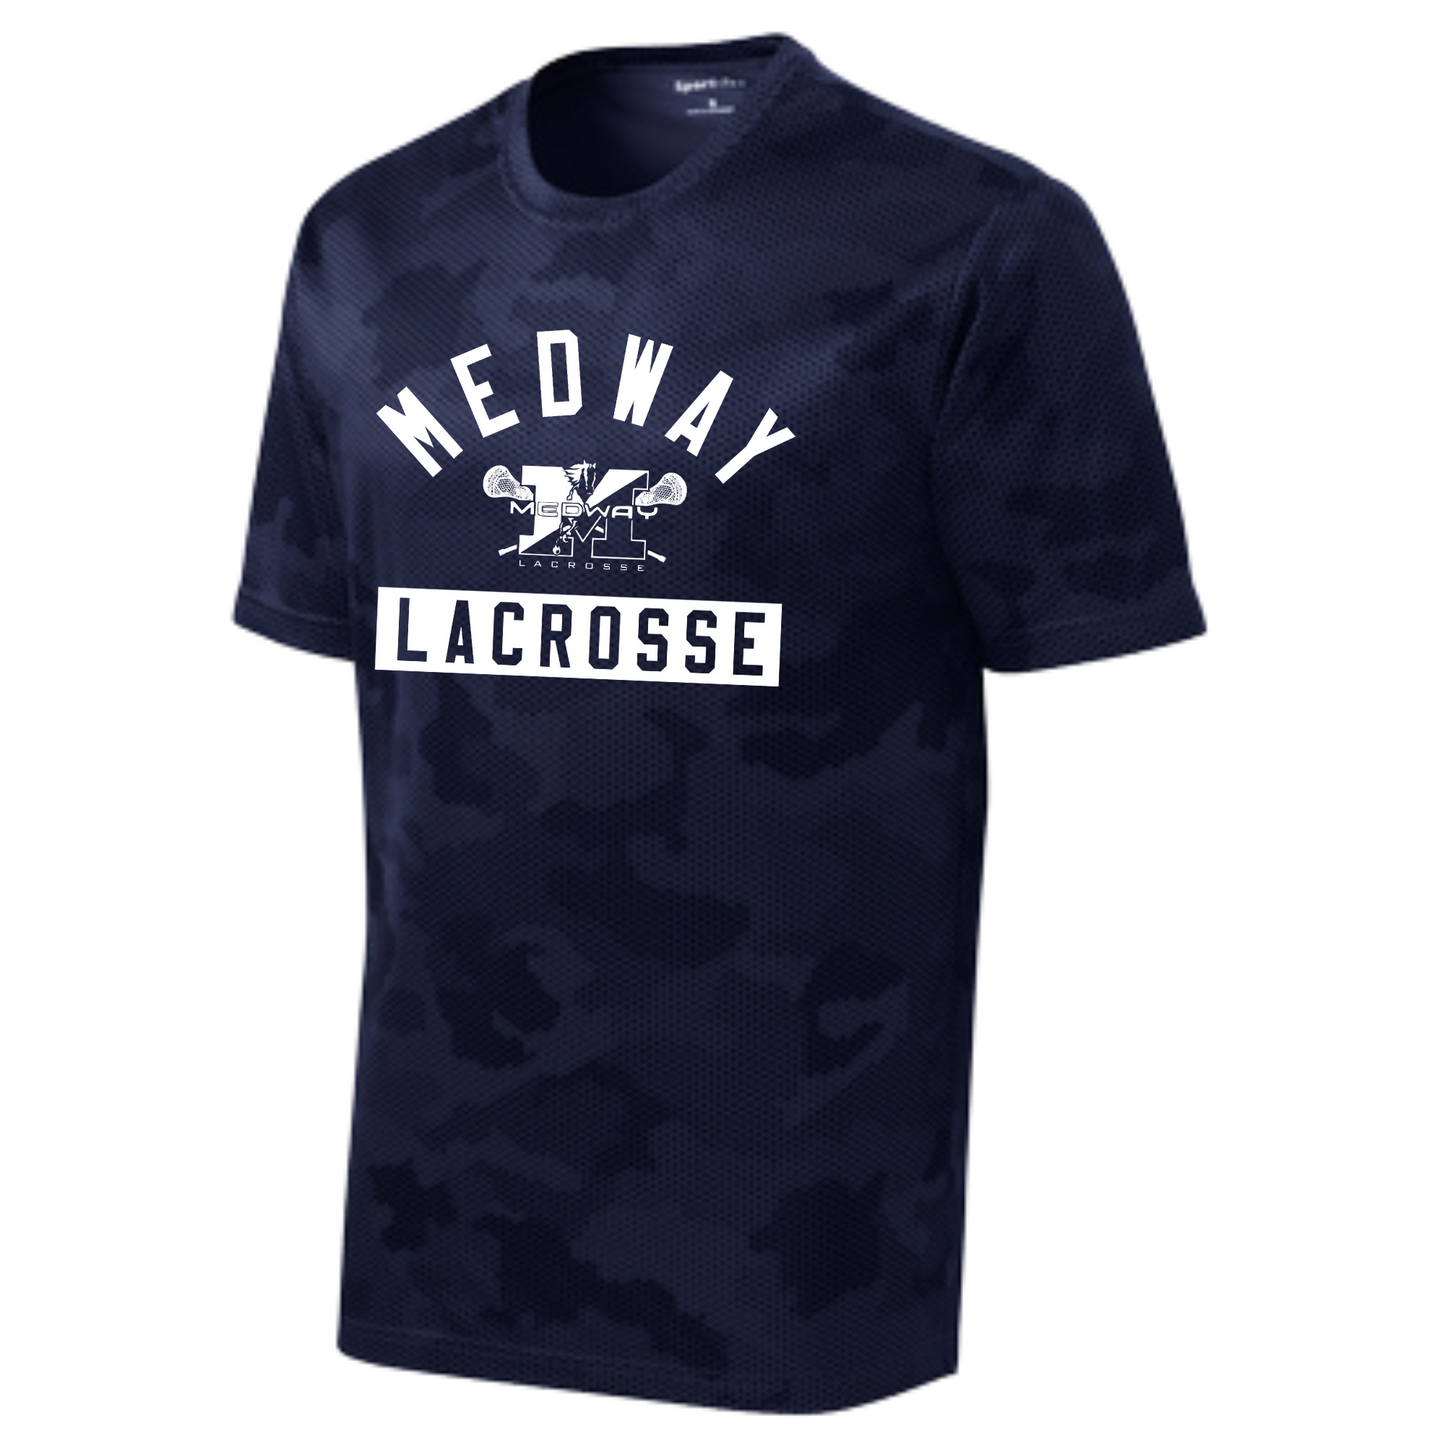 MEDWAY YOUTH LACROSSE ARCH SPORT-TEK CAMOHEX YOUTH TEE - NAVY